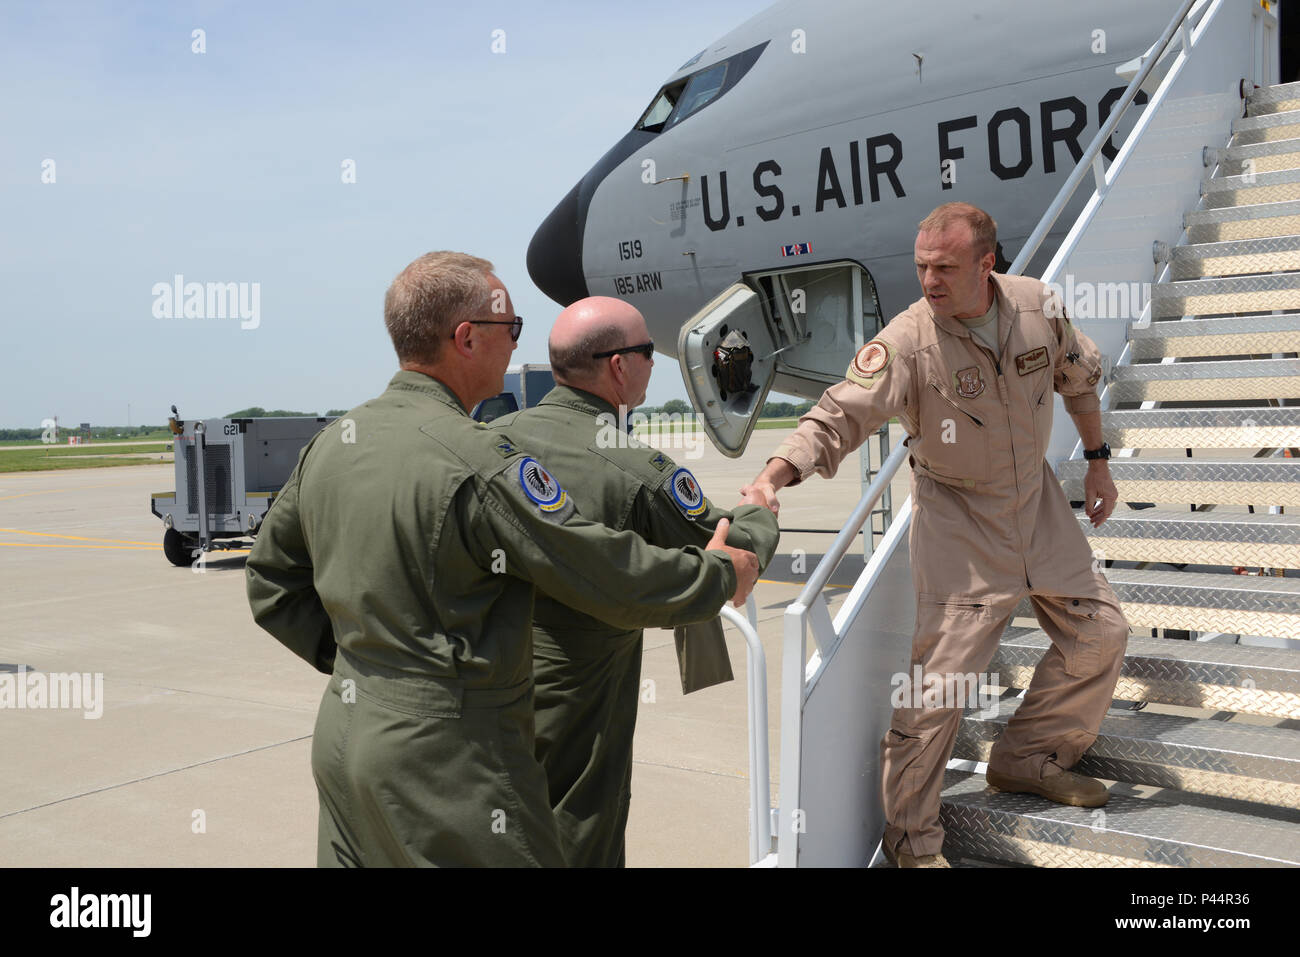 Col Lawrence Christensen, 185th Air Refueling Wing Commander, Iowa Air National Guard and Colonel Jim Walker 185th Operations Group commander, greet Senior Master Sgt. Chuck Heald at the bottom of the air stair of a KC-135R Stratotanker, in Sioux City, Iowa on June 11, 2016 after returning from Al Udeid Air Base. 185th ARW unit members and aircraft were temporarily assigned to the 340th Expeditionary Air Refueling Squadron at Al Udeid since February, where they were providing midair refueling support for U.S. and partner nation aircraft in direct support of Operation Inherent Resolve.  (U.S. A Stock Photo